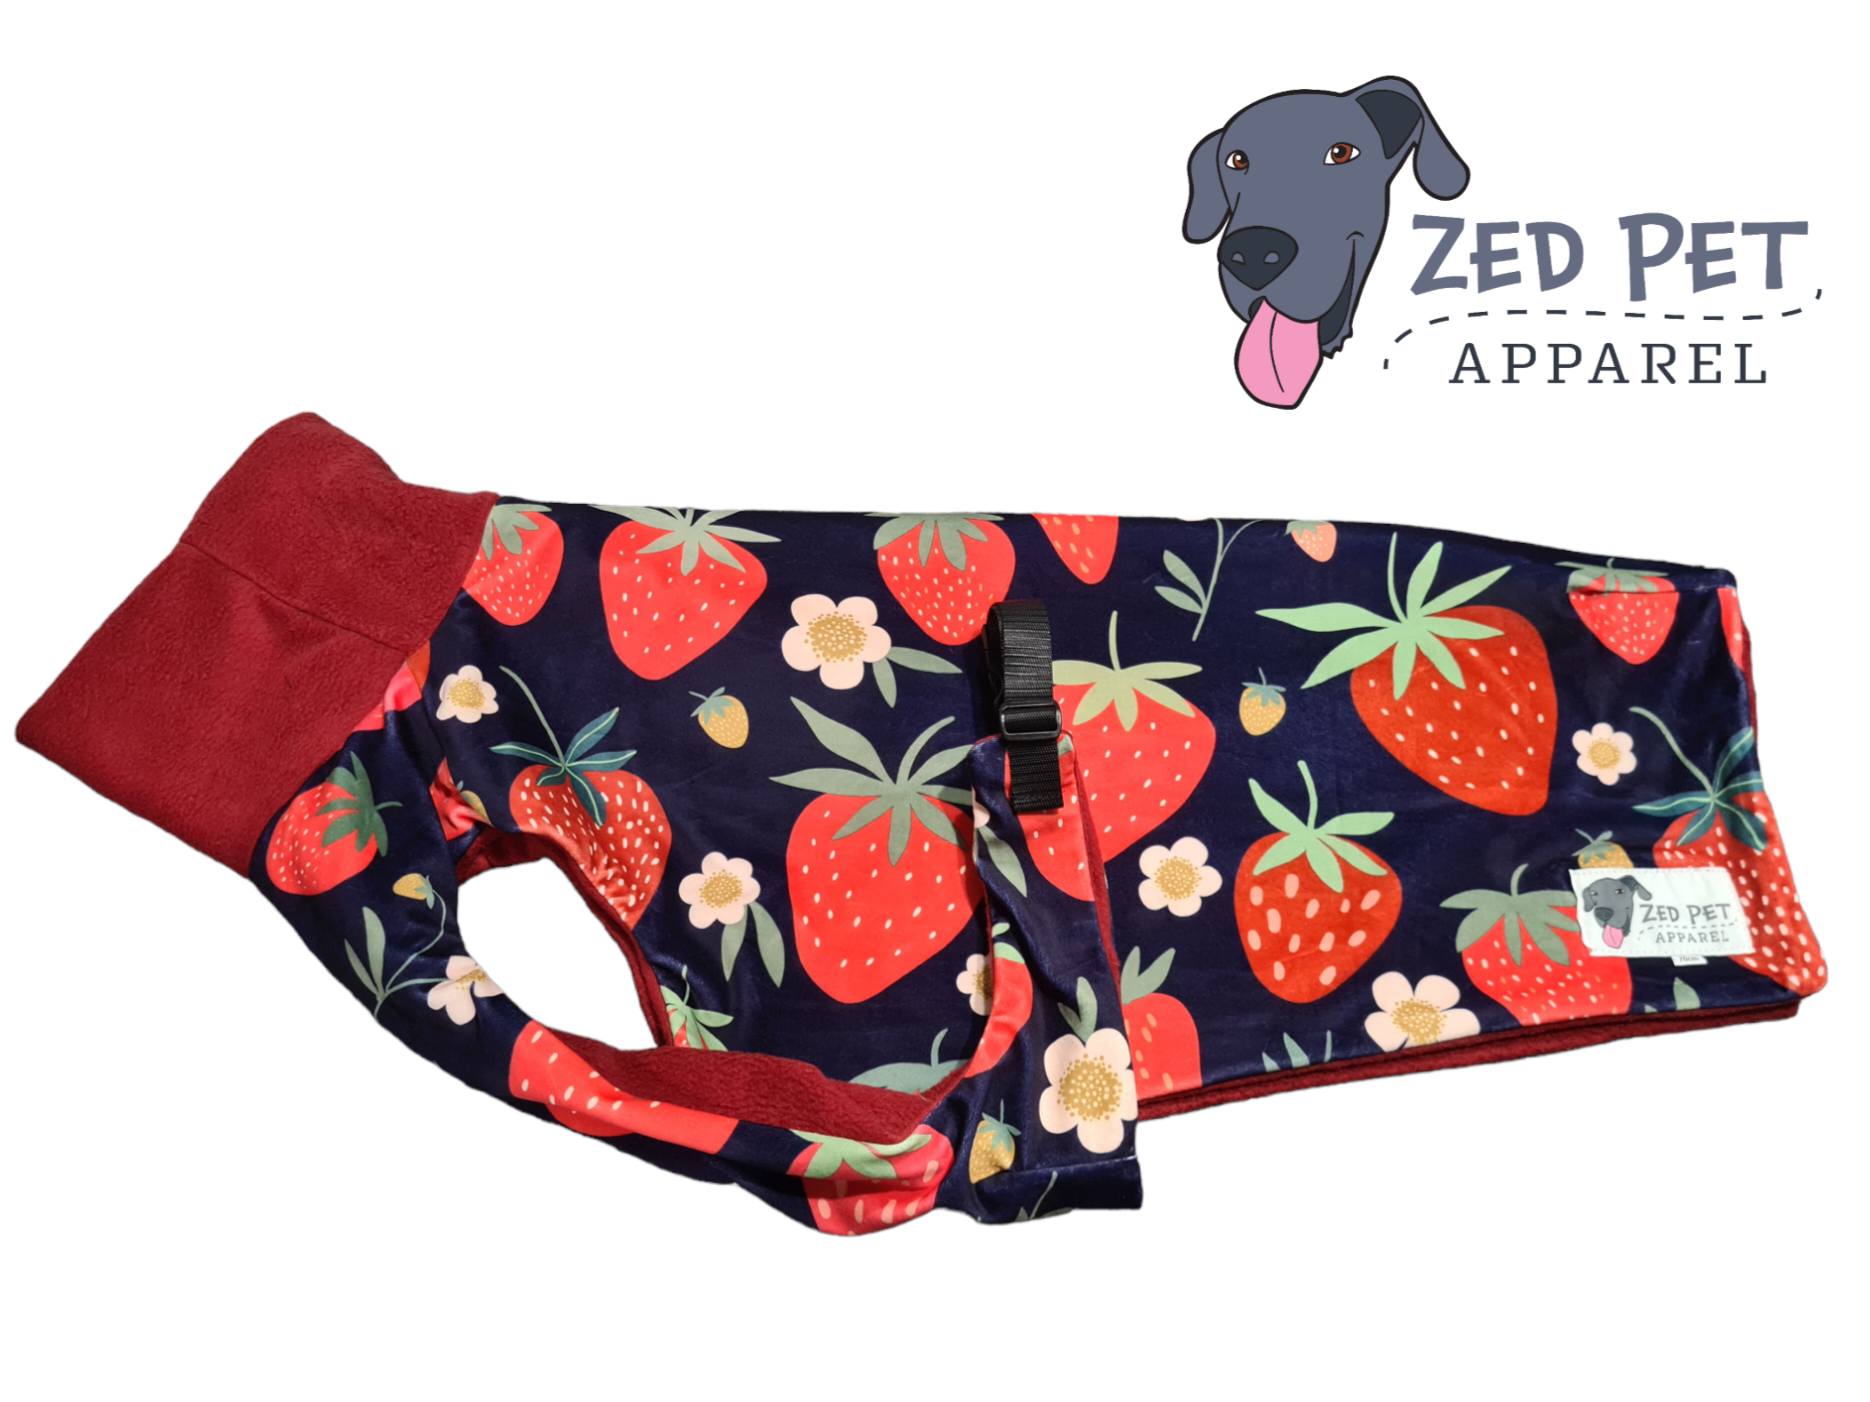 Red and navy strawberry print fleece dog coat